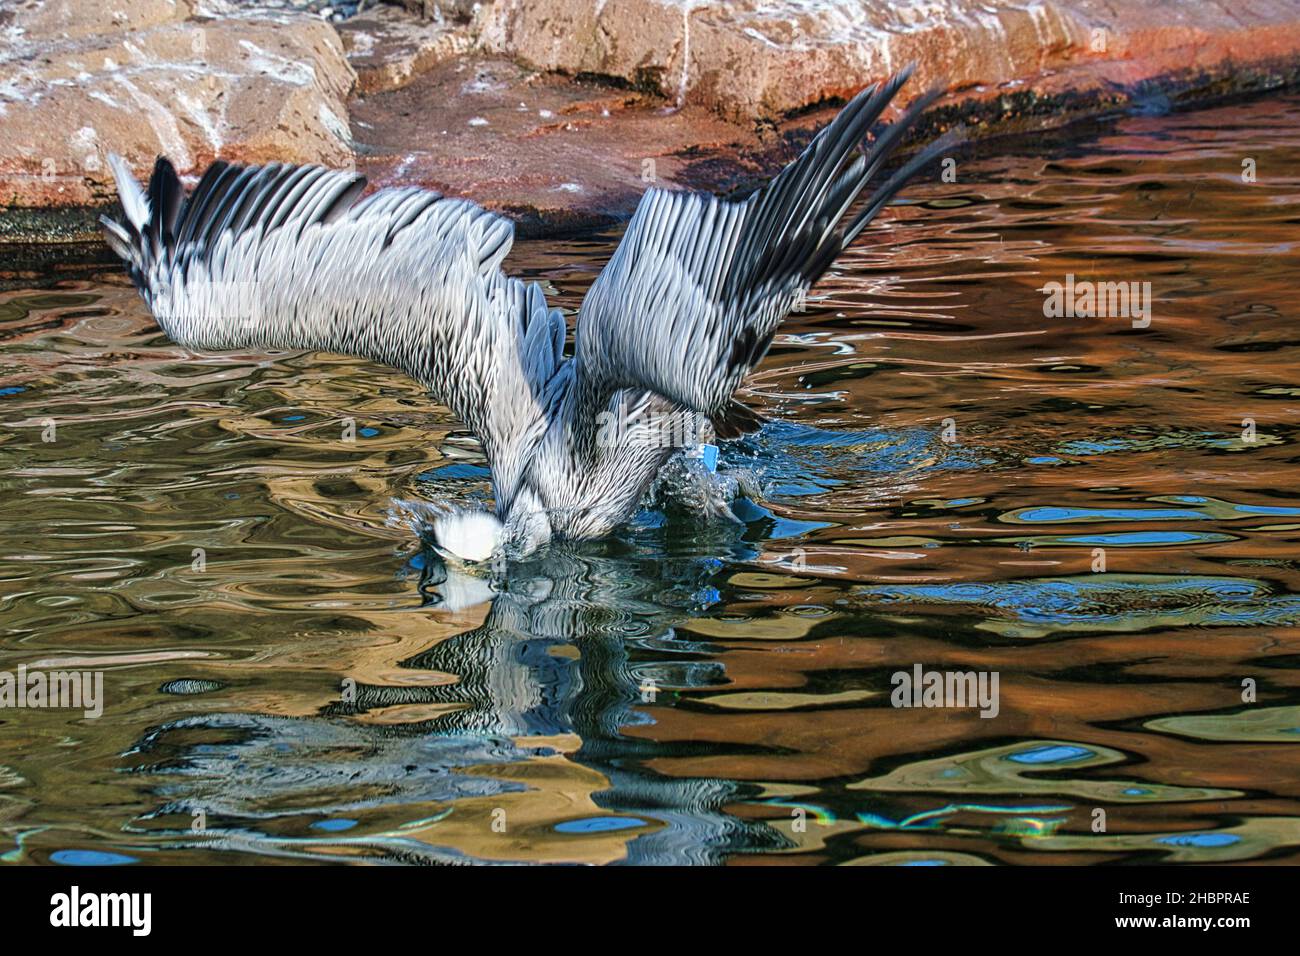 pelican on the water taken while diving. large seabird with richly textured plumage. Bird in portrait. Stock Photo